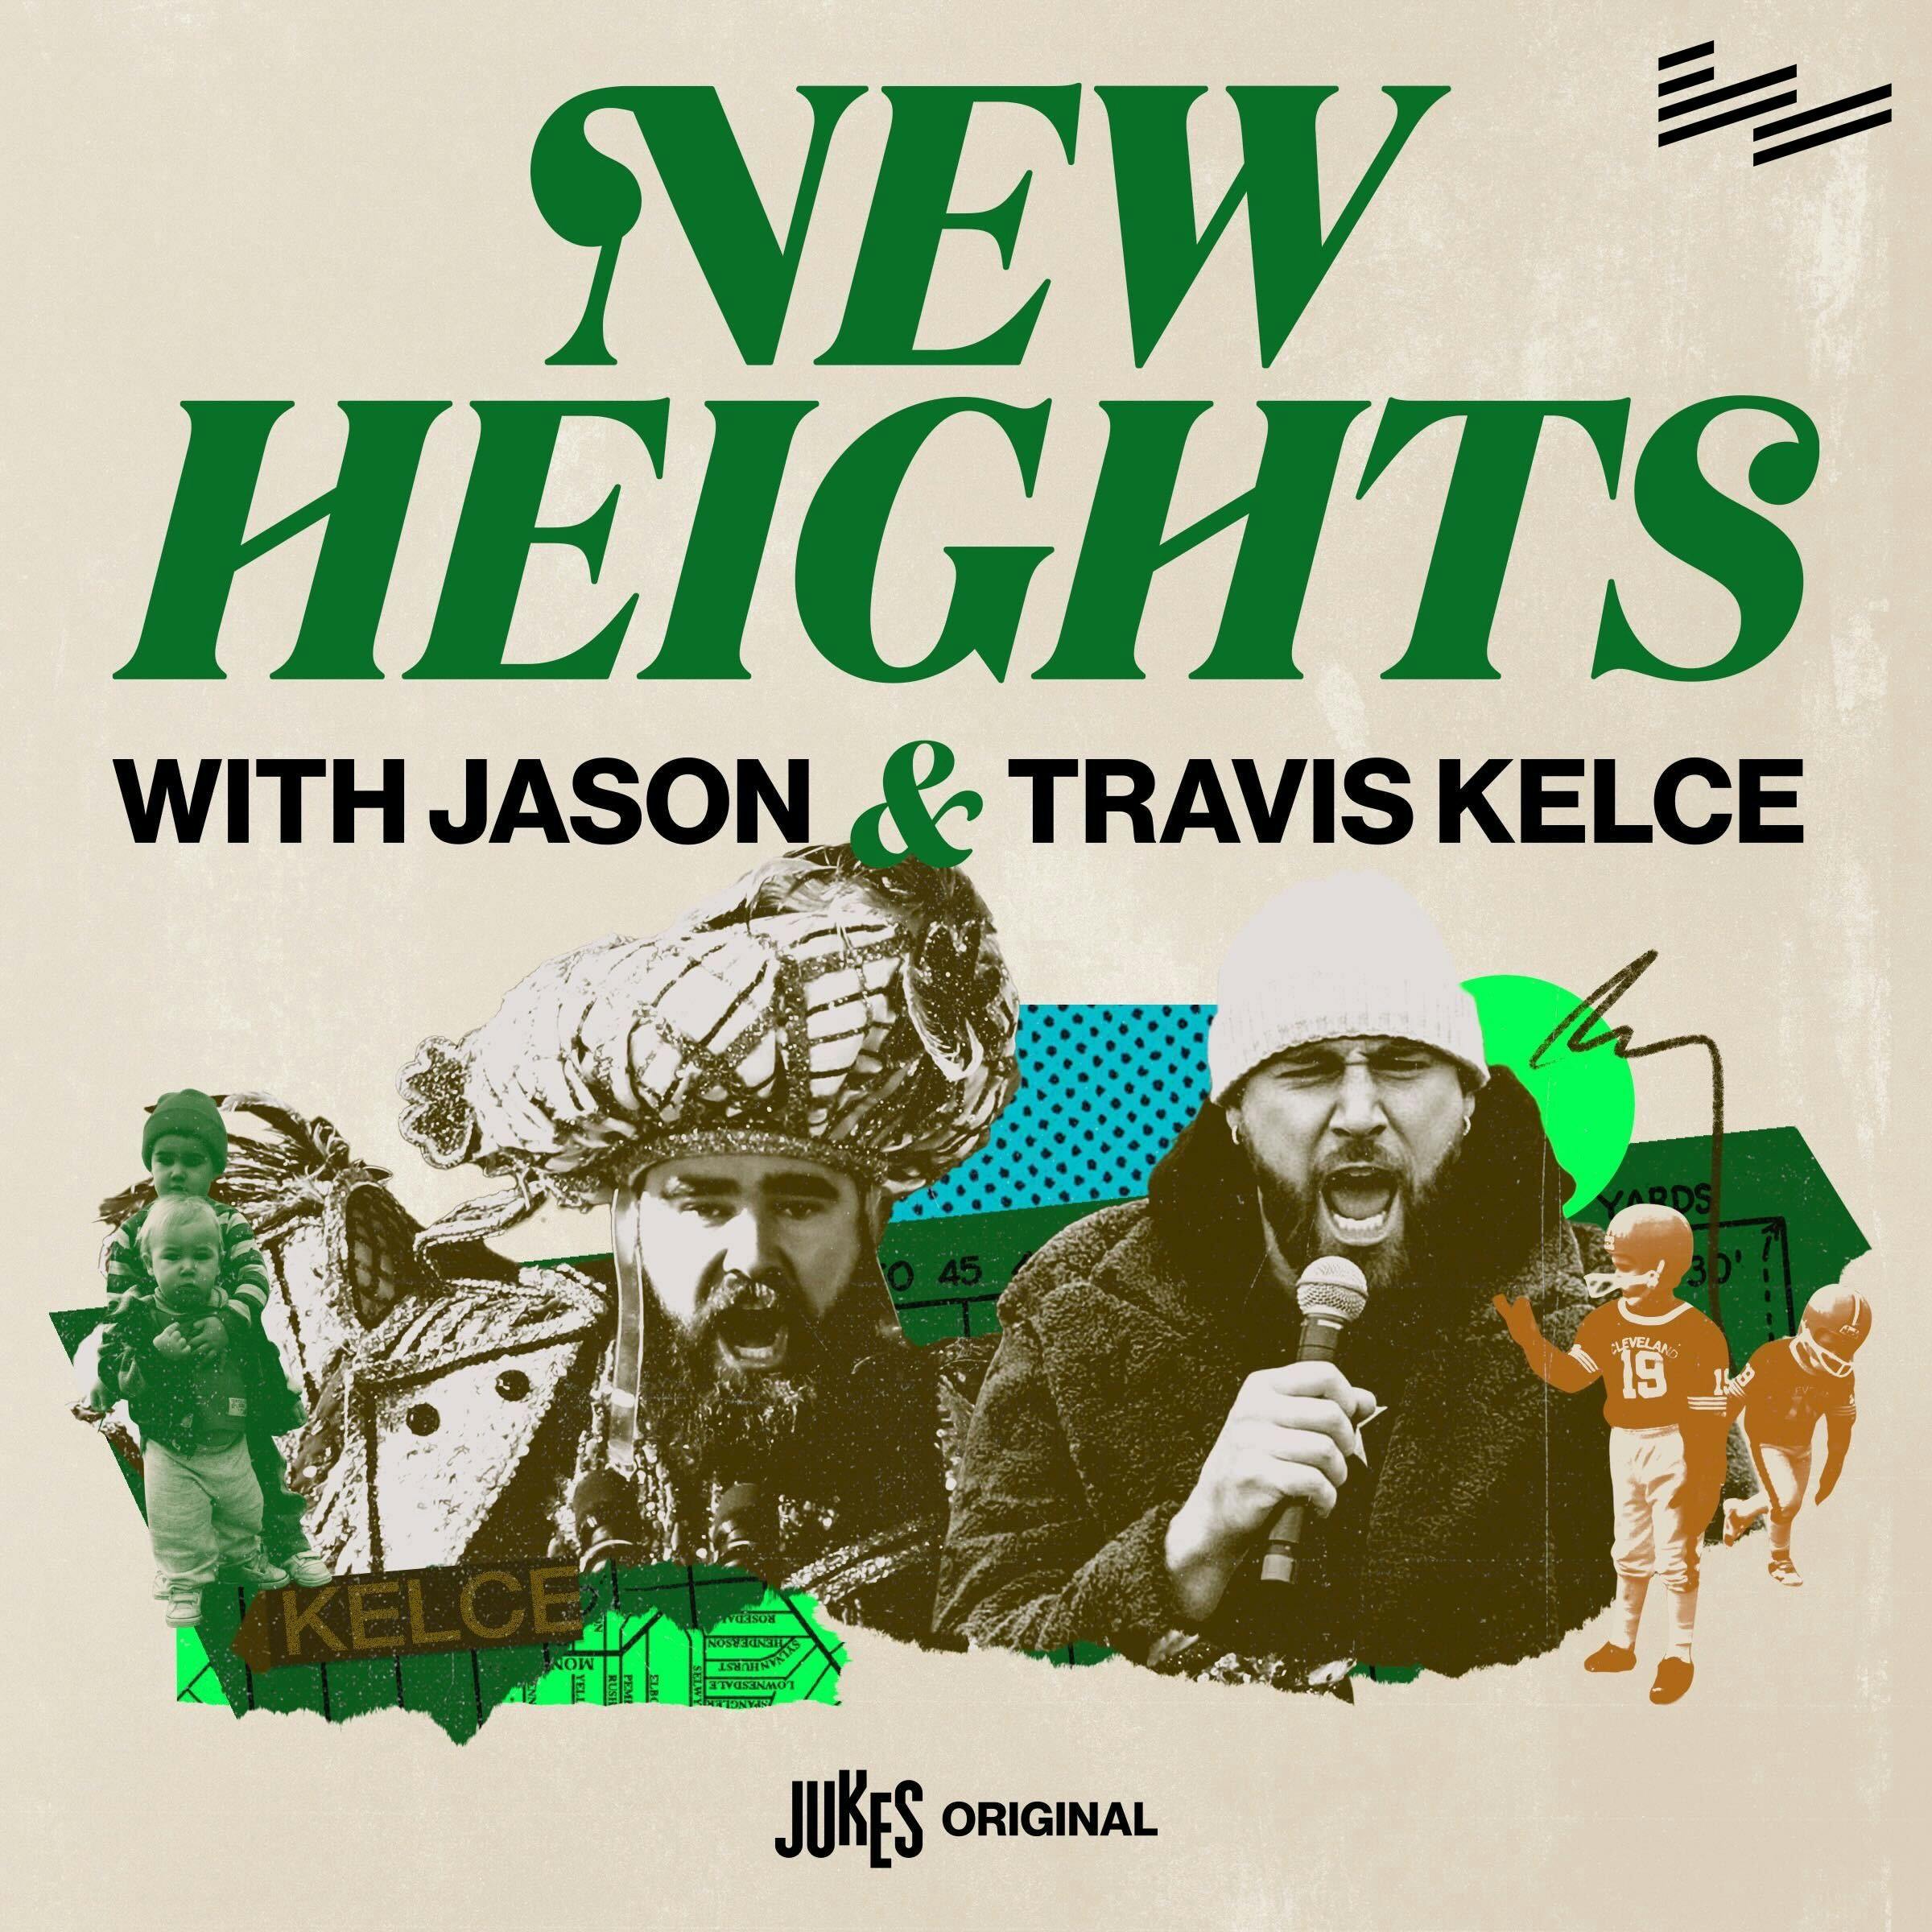 New Heights with Jason and Travis Kelce podcast show image